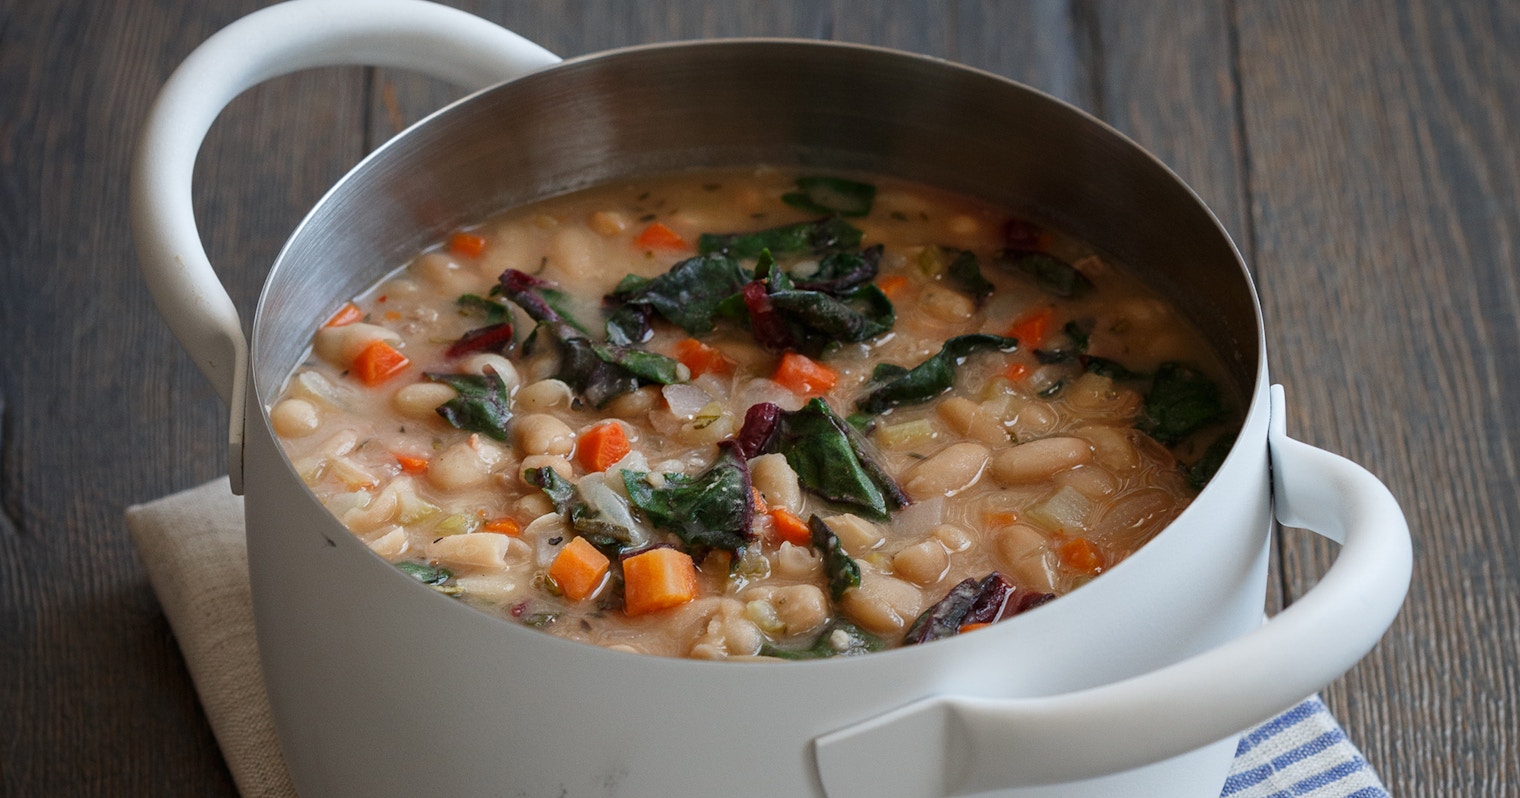 Tuscan White Bean Soup Recipe - Step By Step Guide